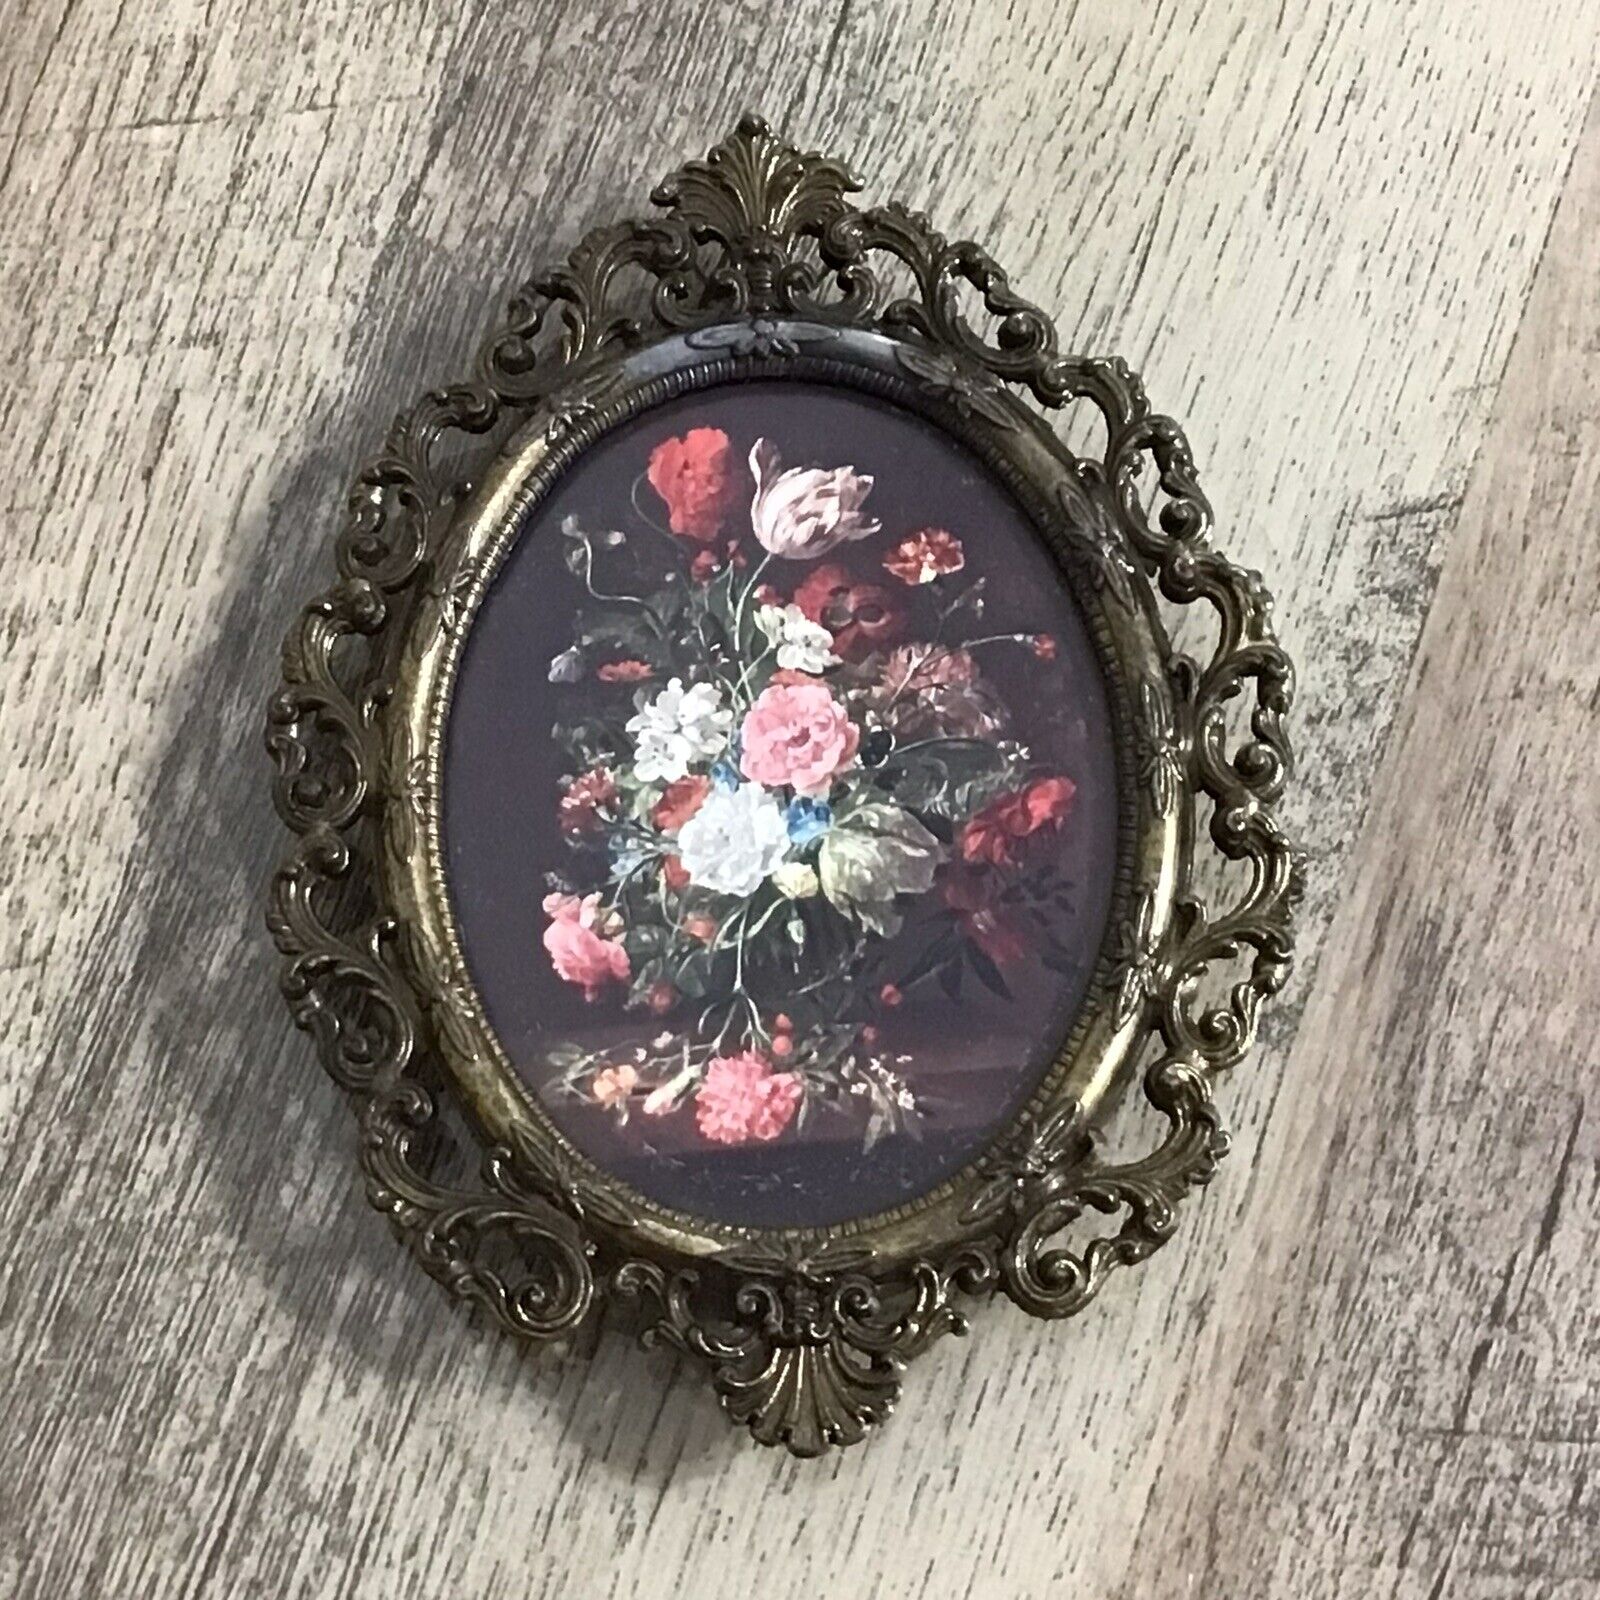 Vintage Ornate Small Metal Oval Picture Frame Floral Decor Made in Italy